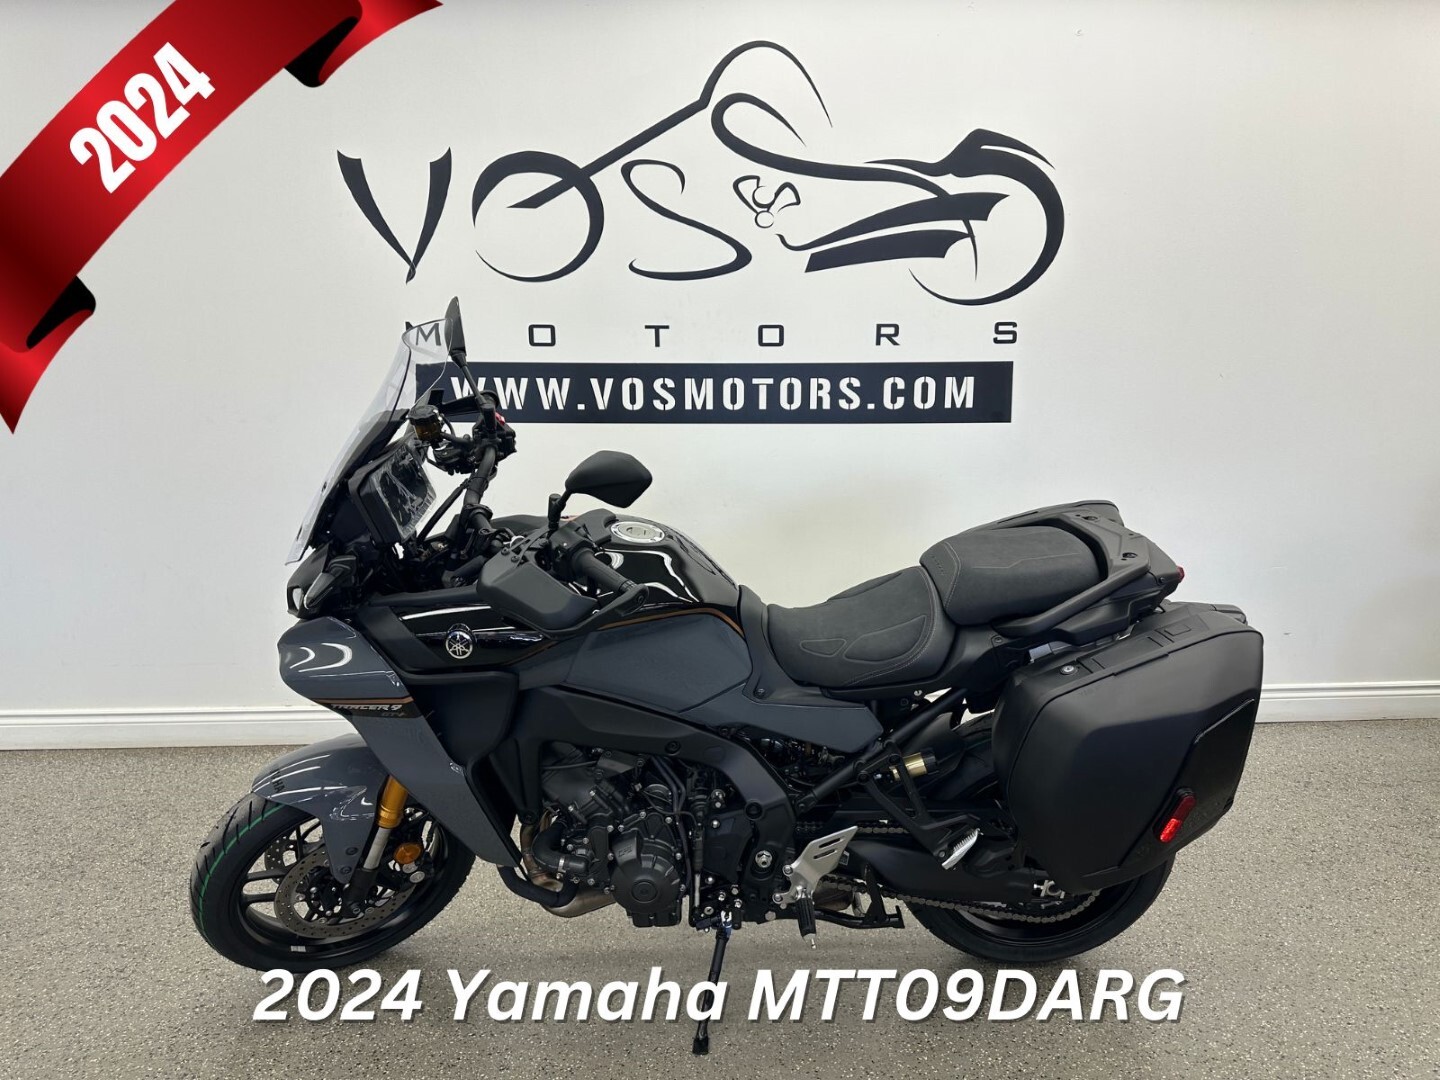 2024 Yamaha MTT09DARG Tracer 900GT - V6029NP - -No Payments for 1 Year**